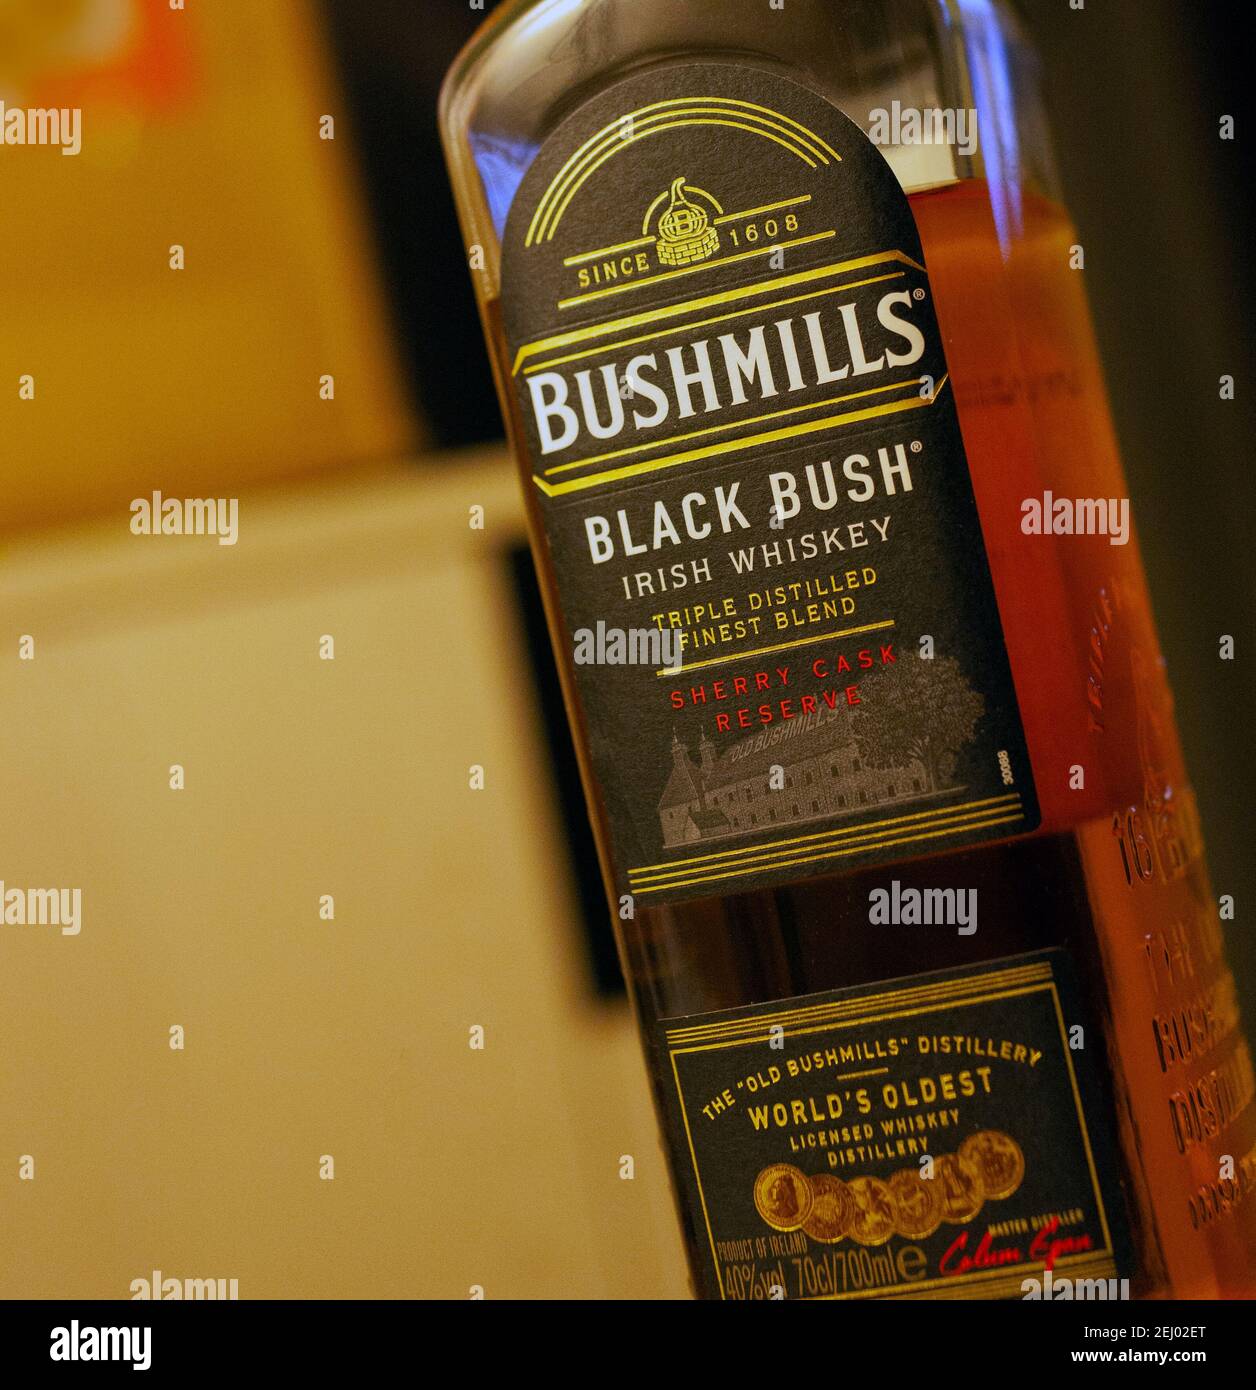 CHISINAU, MOLDOCA - FEBRUARY 19, 2021: Bottle of Bushmills Original Irish whiskey, a product of Old Bushmills Distillery founded in 1608, today owned by Stock Photo